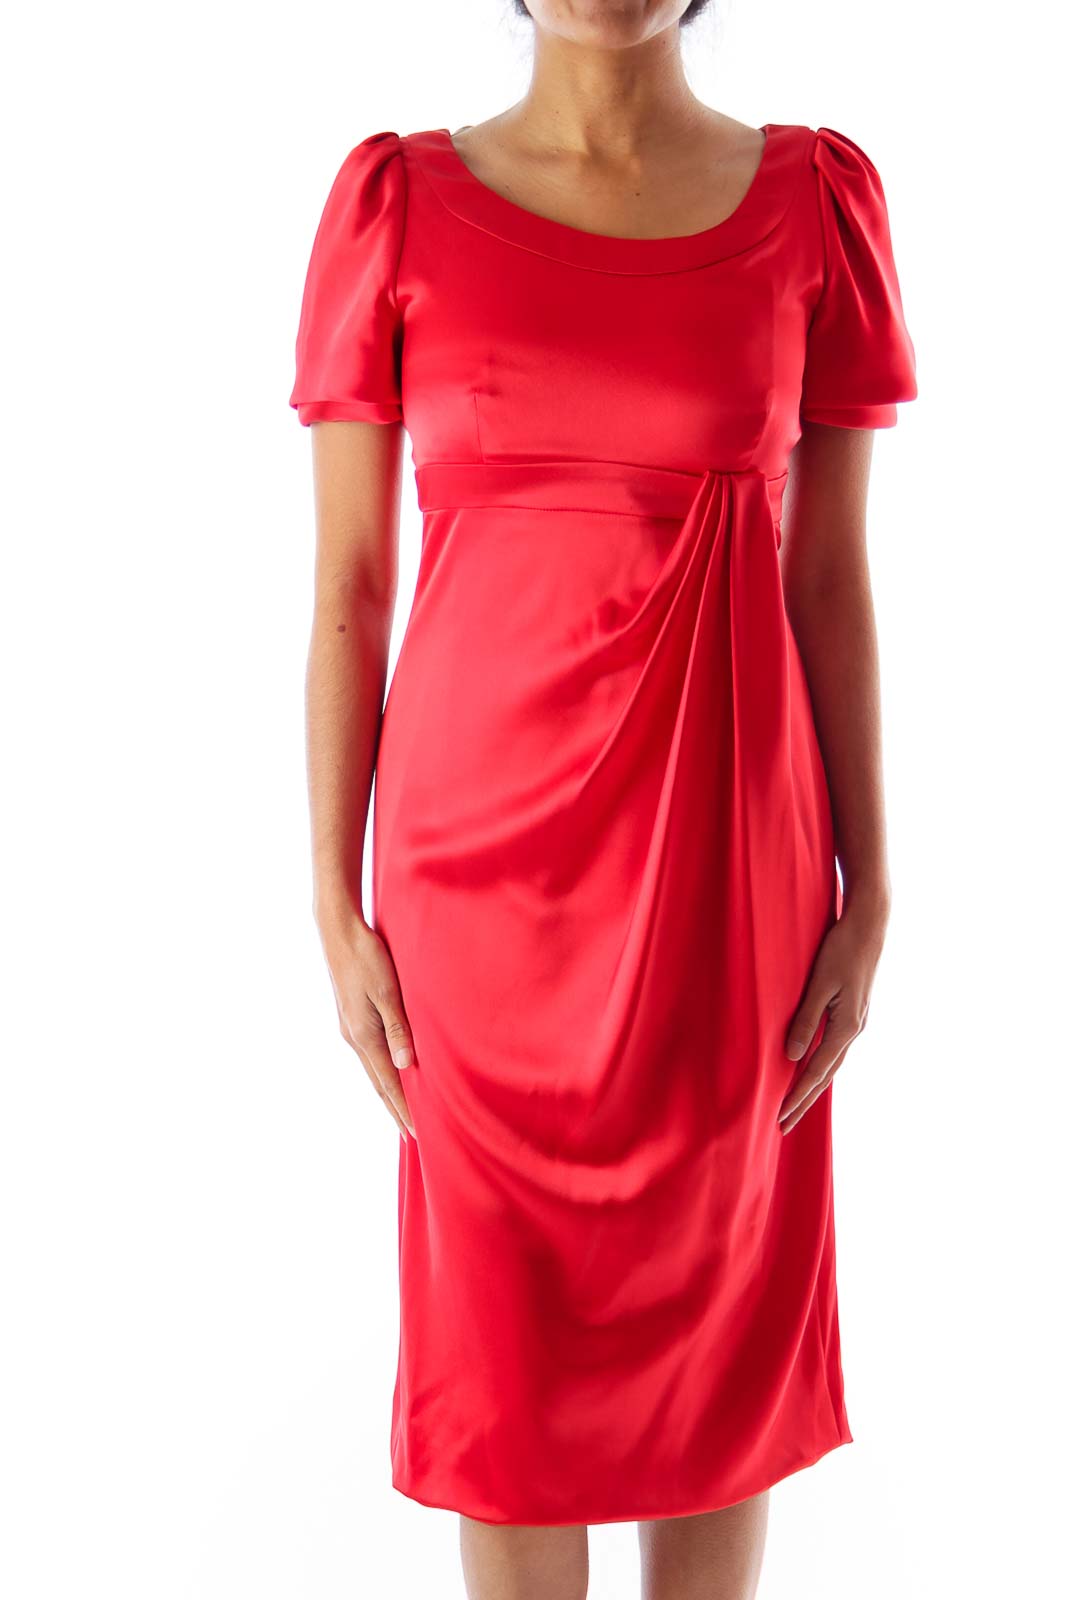 Red Empire Dress Front